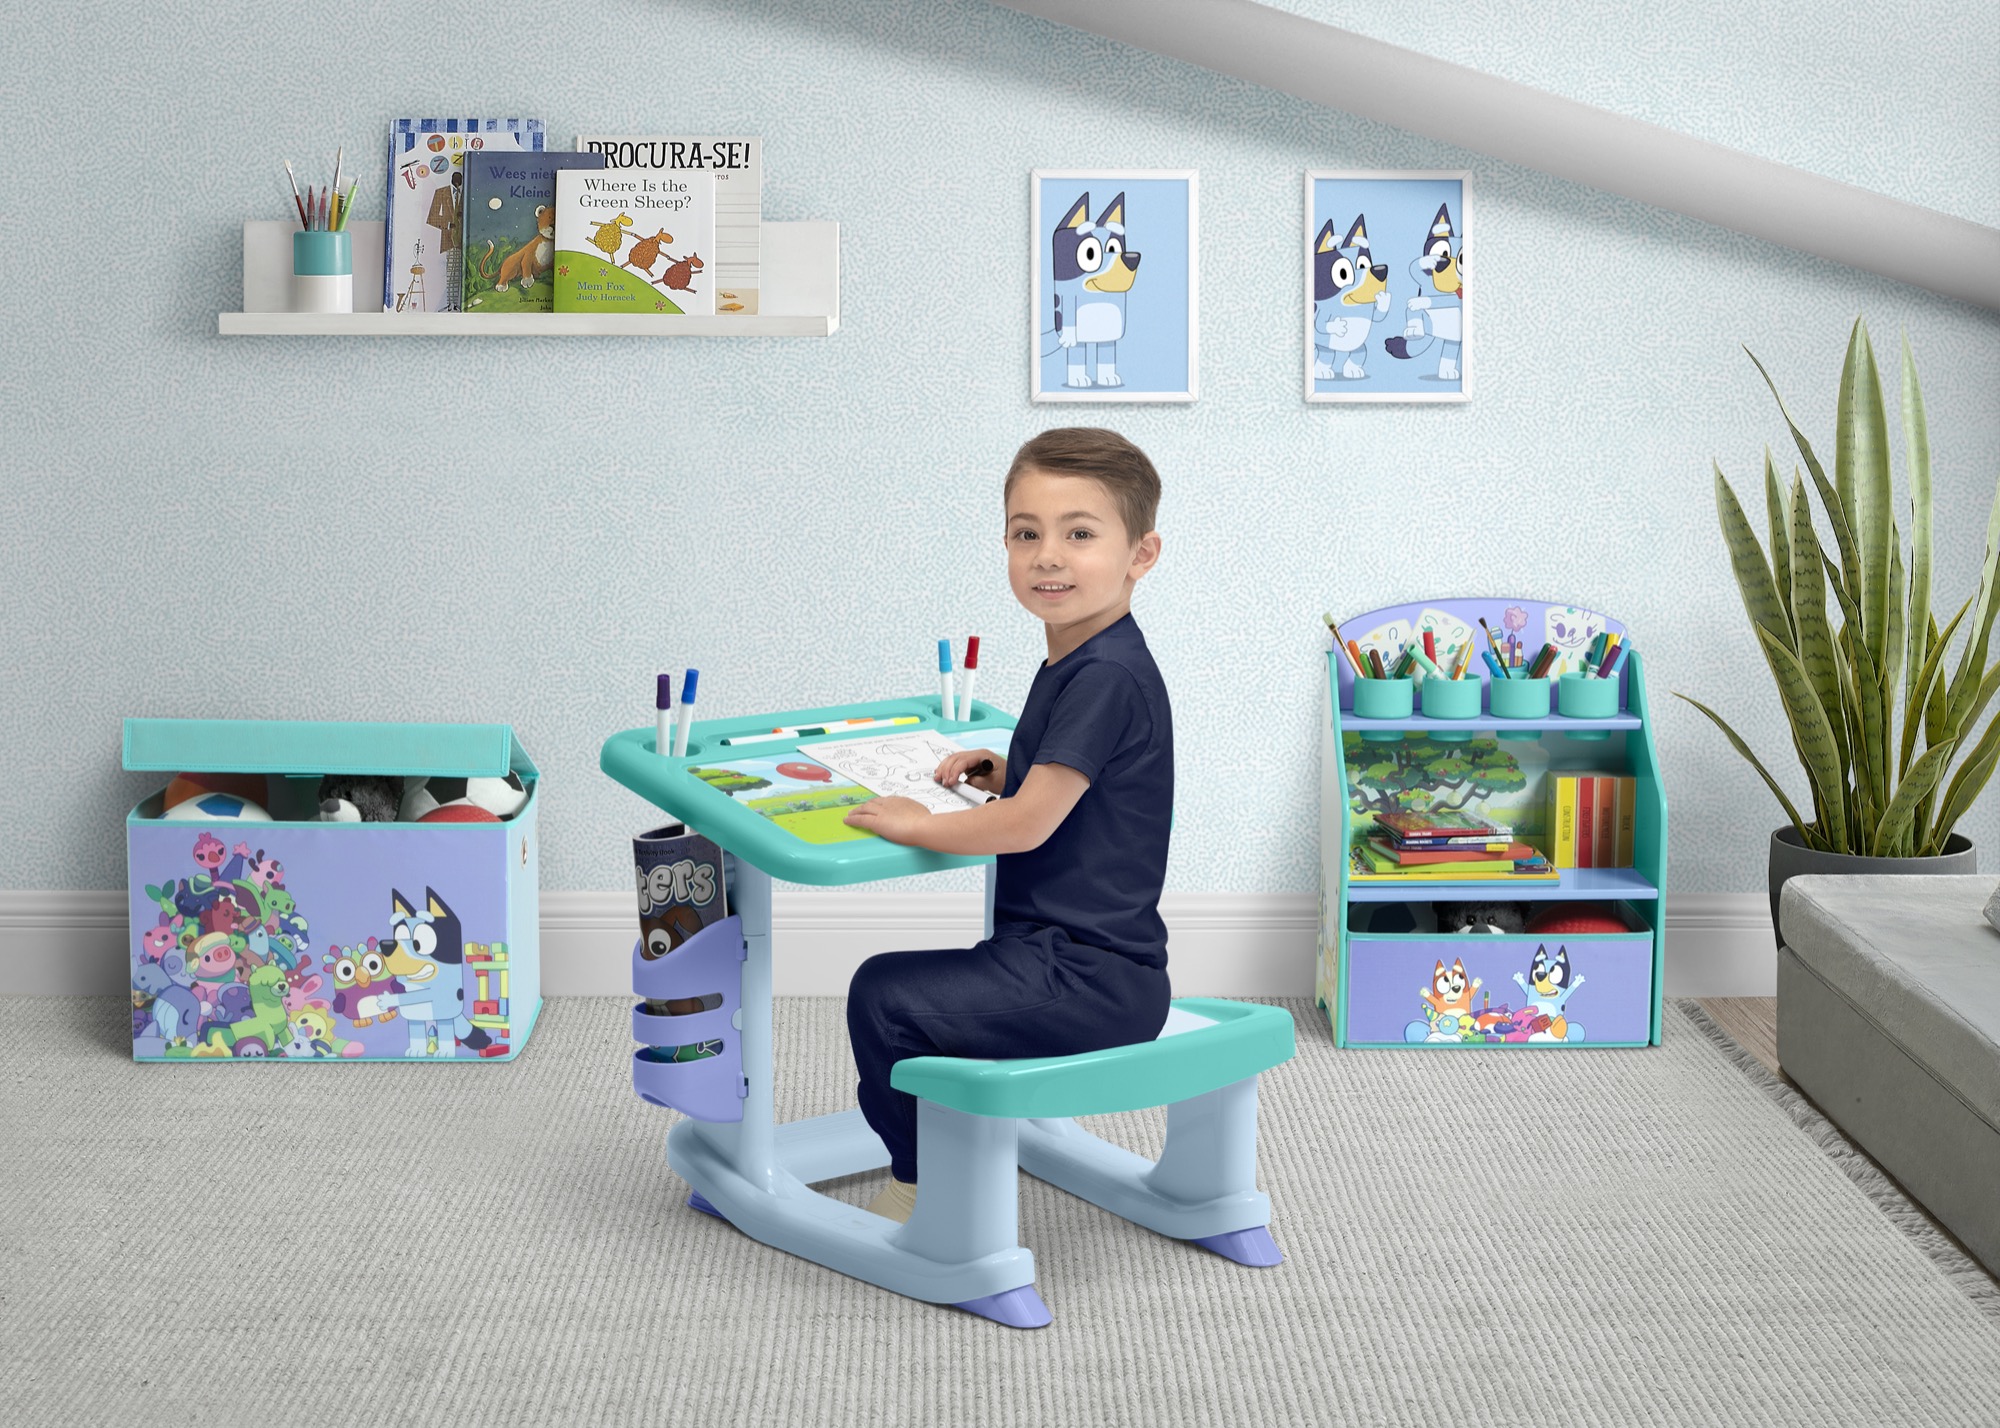 Bluey 3-Piece Art & Play Toddler Room-in-a-Box by Delta Children – Includes Draw & Play Desk, Art & Storage Station & Fabric Toy Box, Blue - image 3 of 11